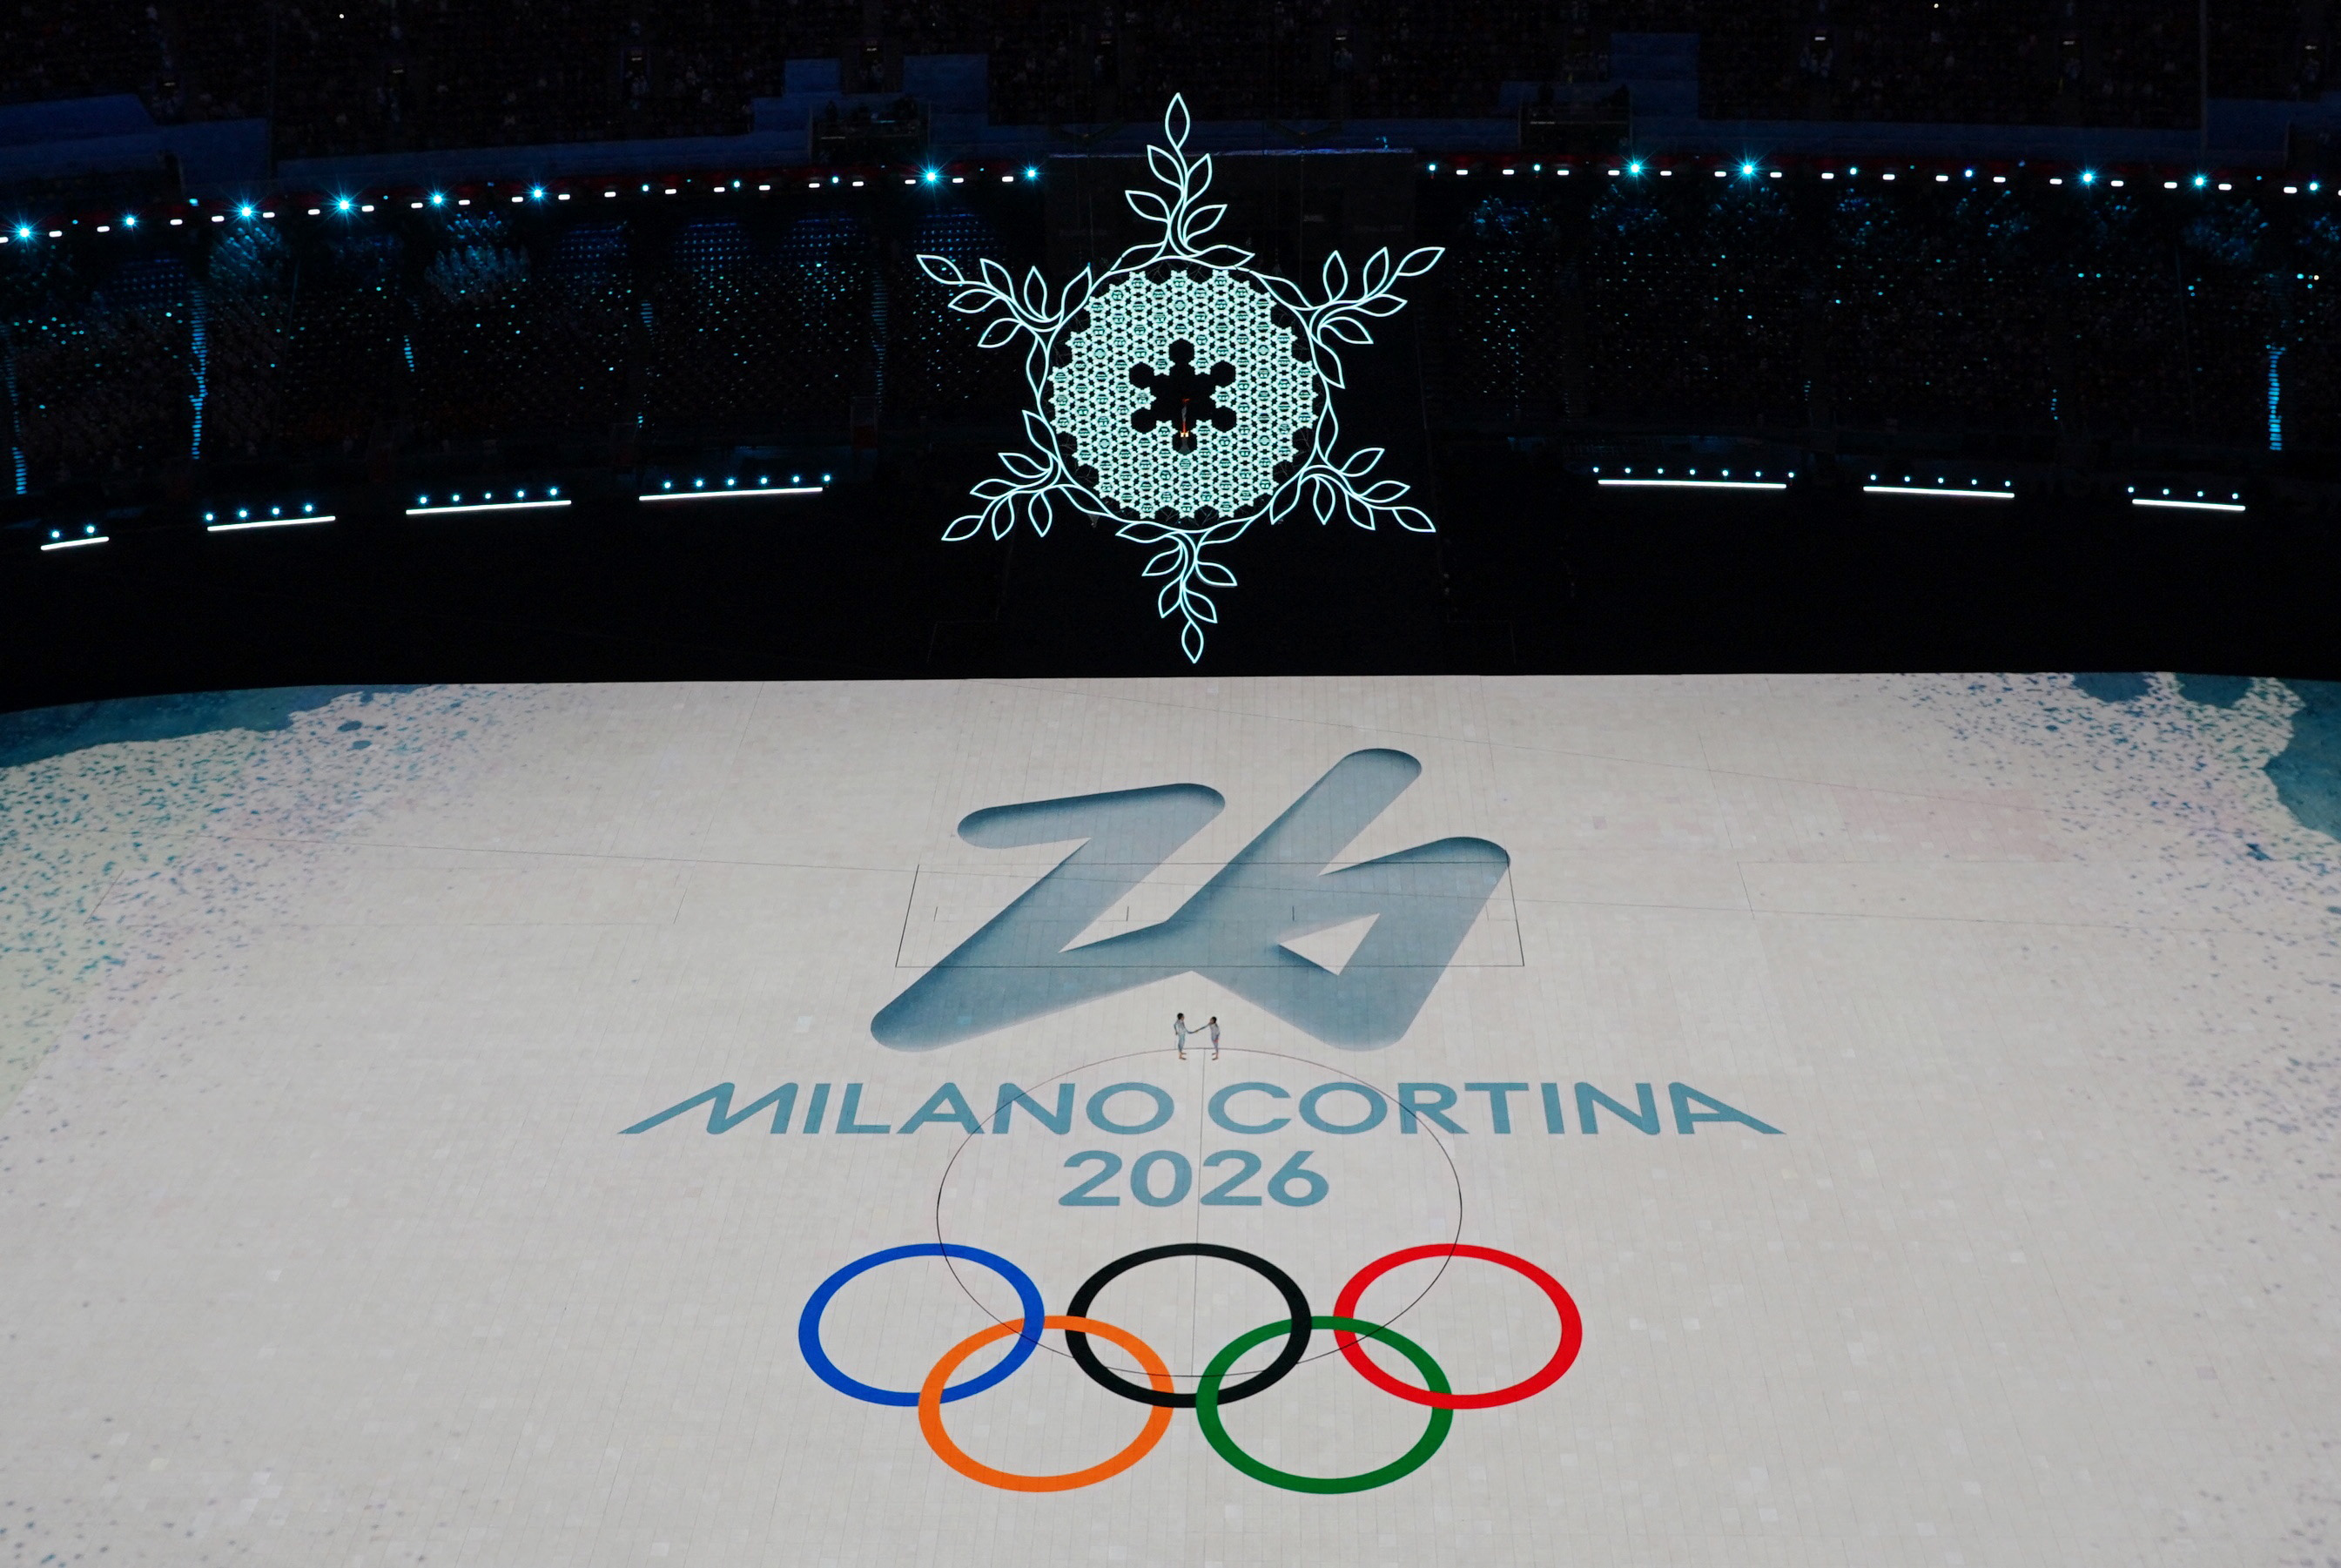 IIHF wants decision from the NHL regarding Milano Cortina 2026 by the end of the year